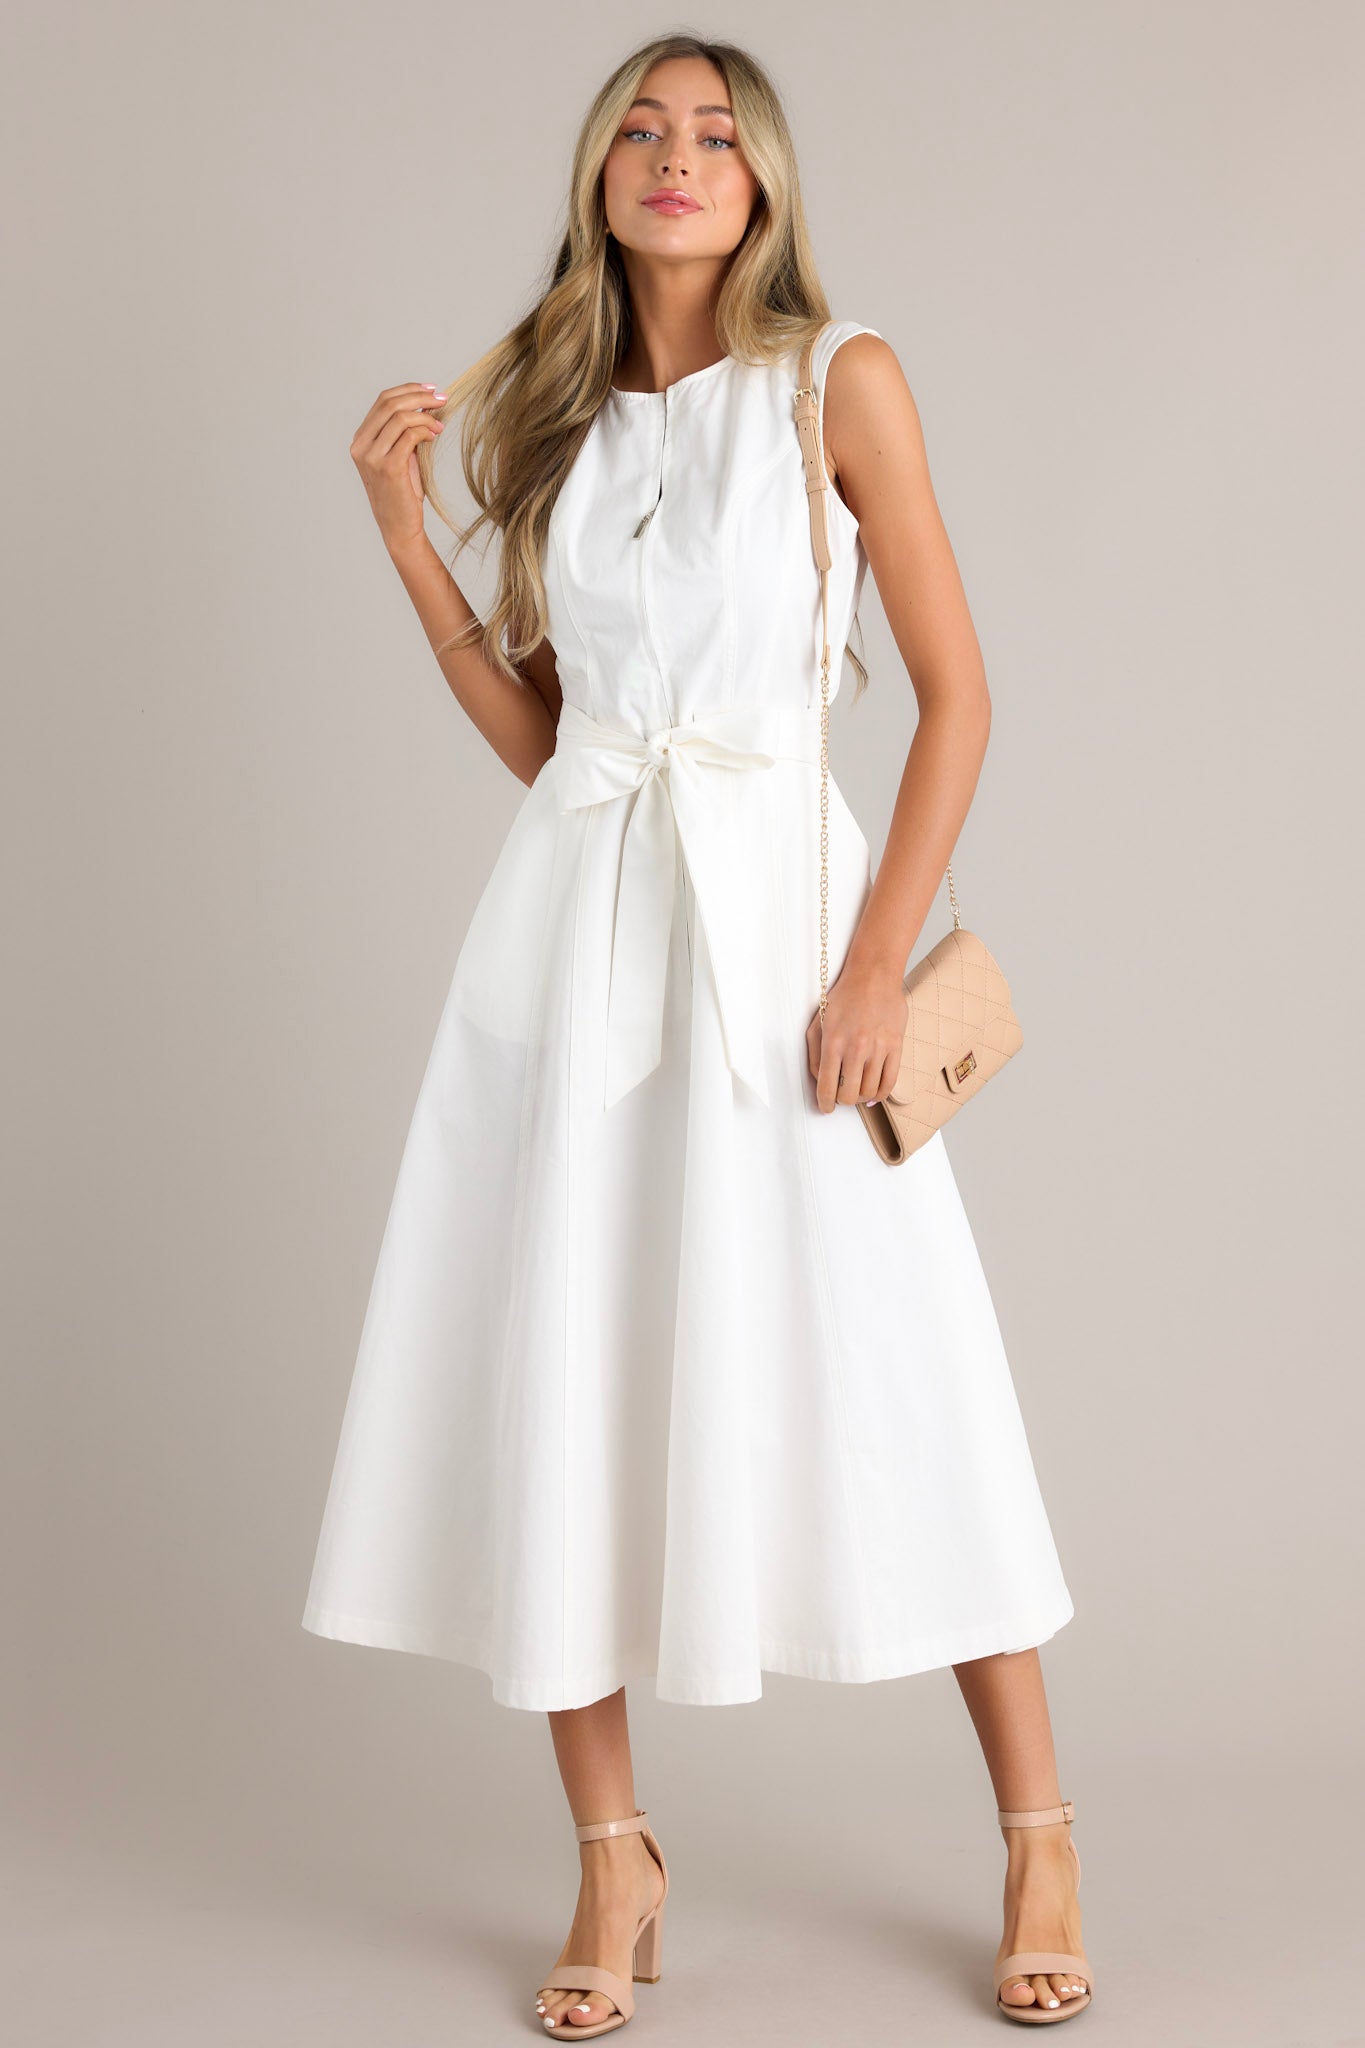 Front view of this white midi dress that features a round neckline, a zipper front, visible front & back seams, a self-tie waist belt, belt loops, functional hip pockets, and a flowing silhouette.